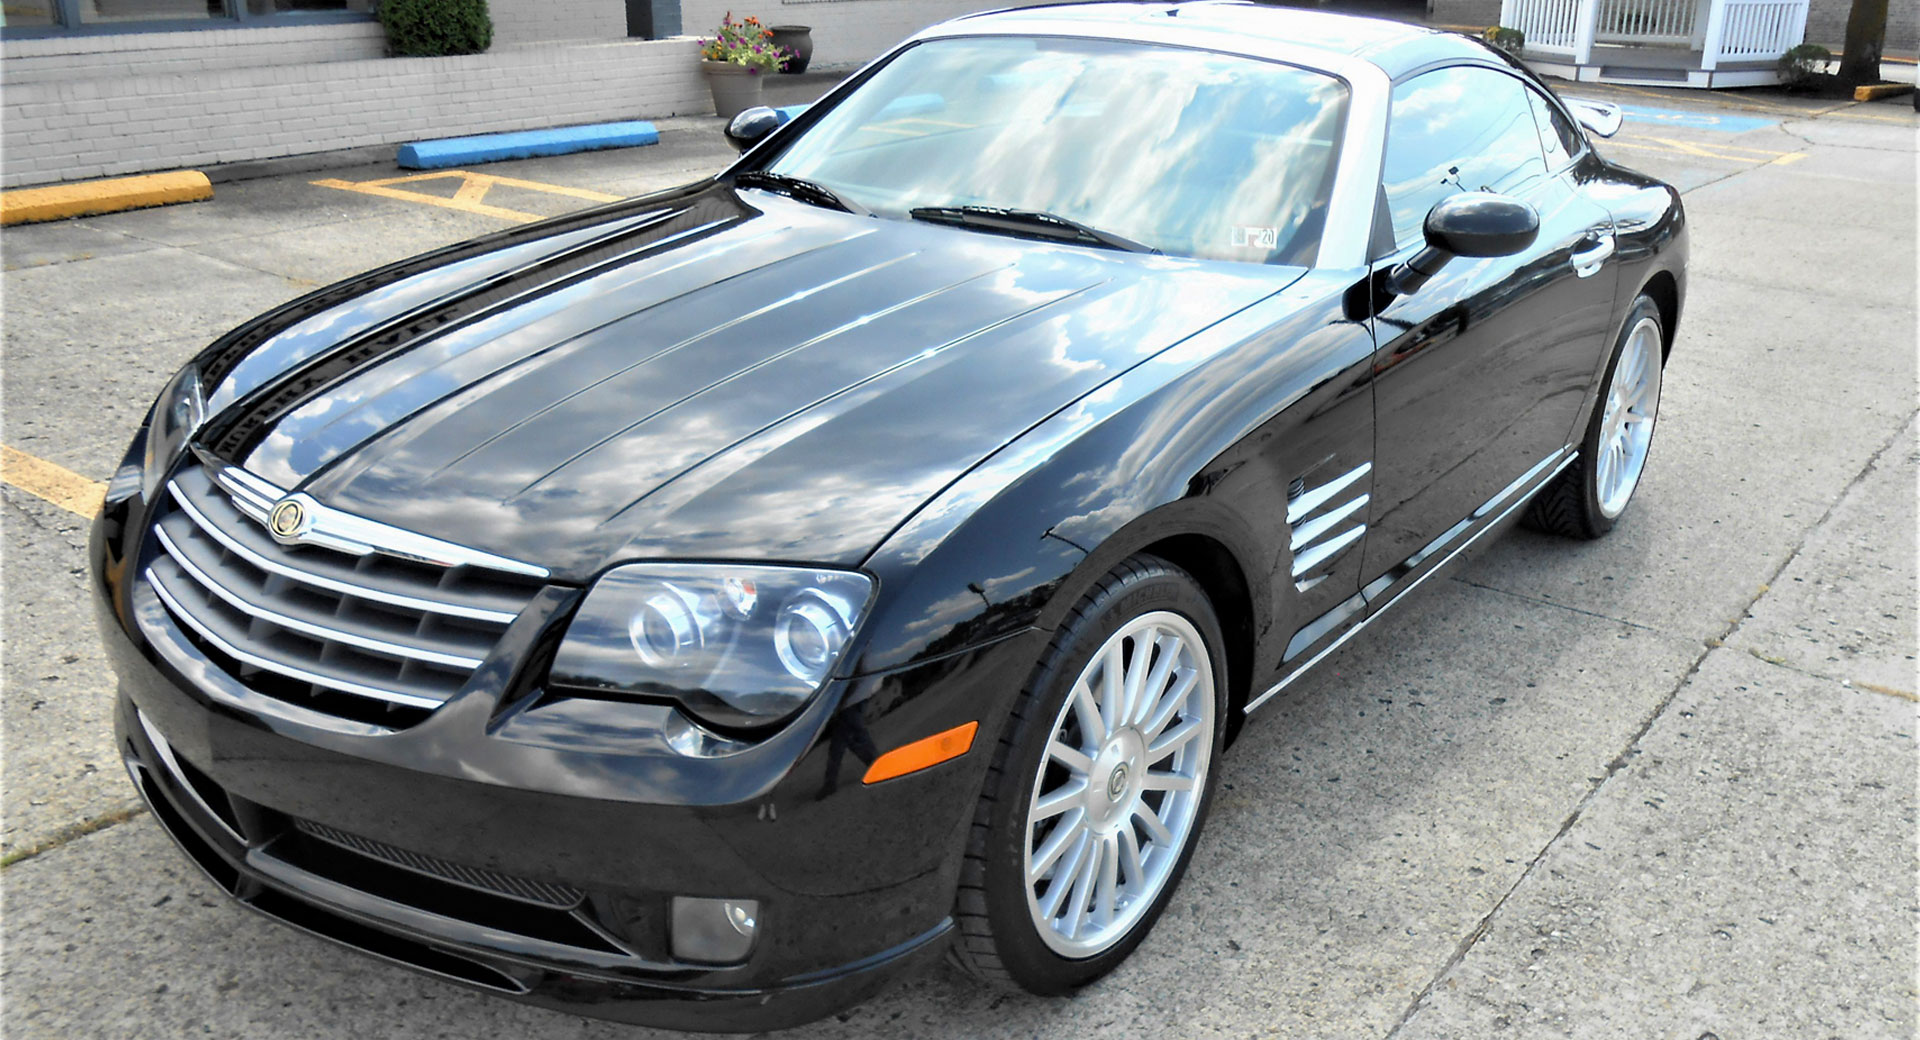 Relive The Merger Of Equals With This 9k-Mile Chrysler Crossfire SRT-6 |  Carscoops